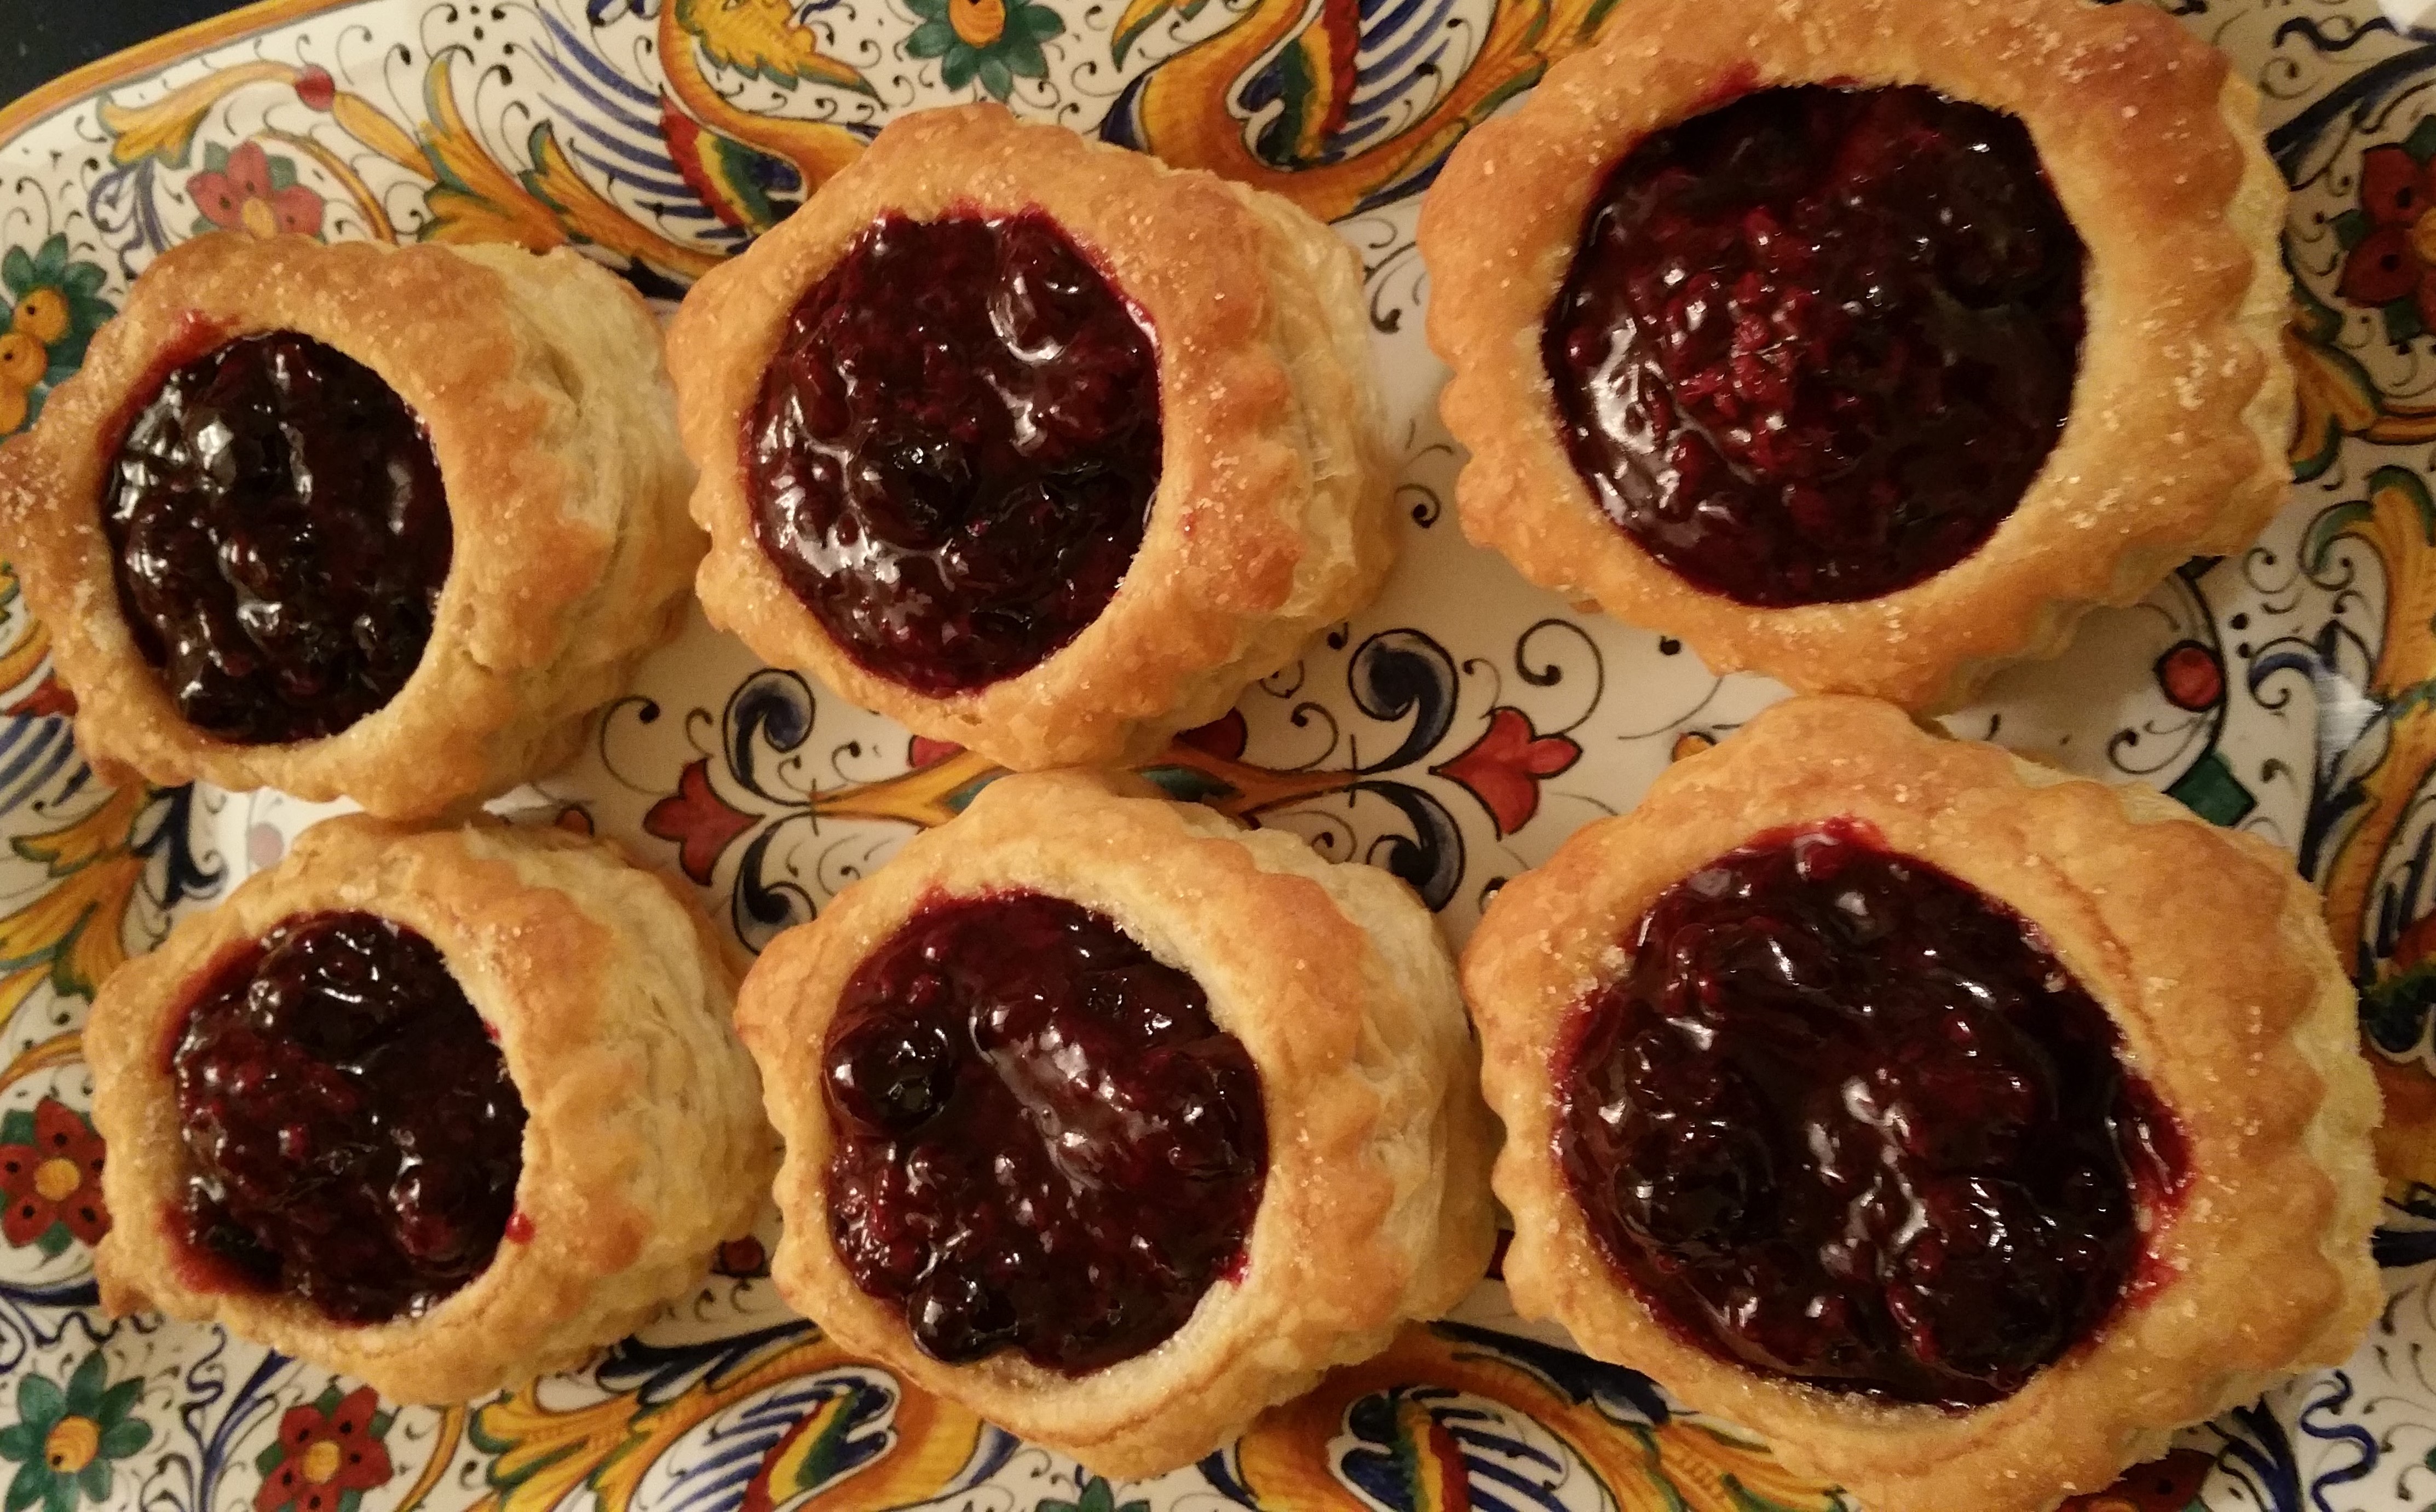 Dewberry Puff with Jam